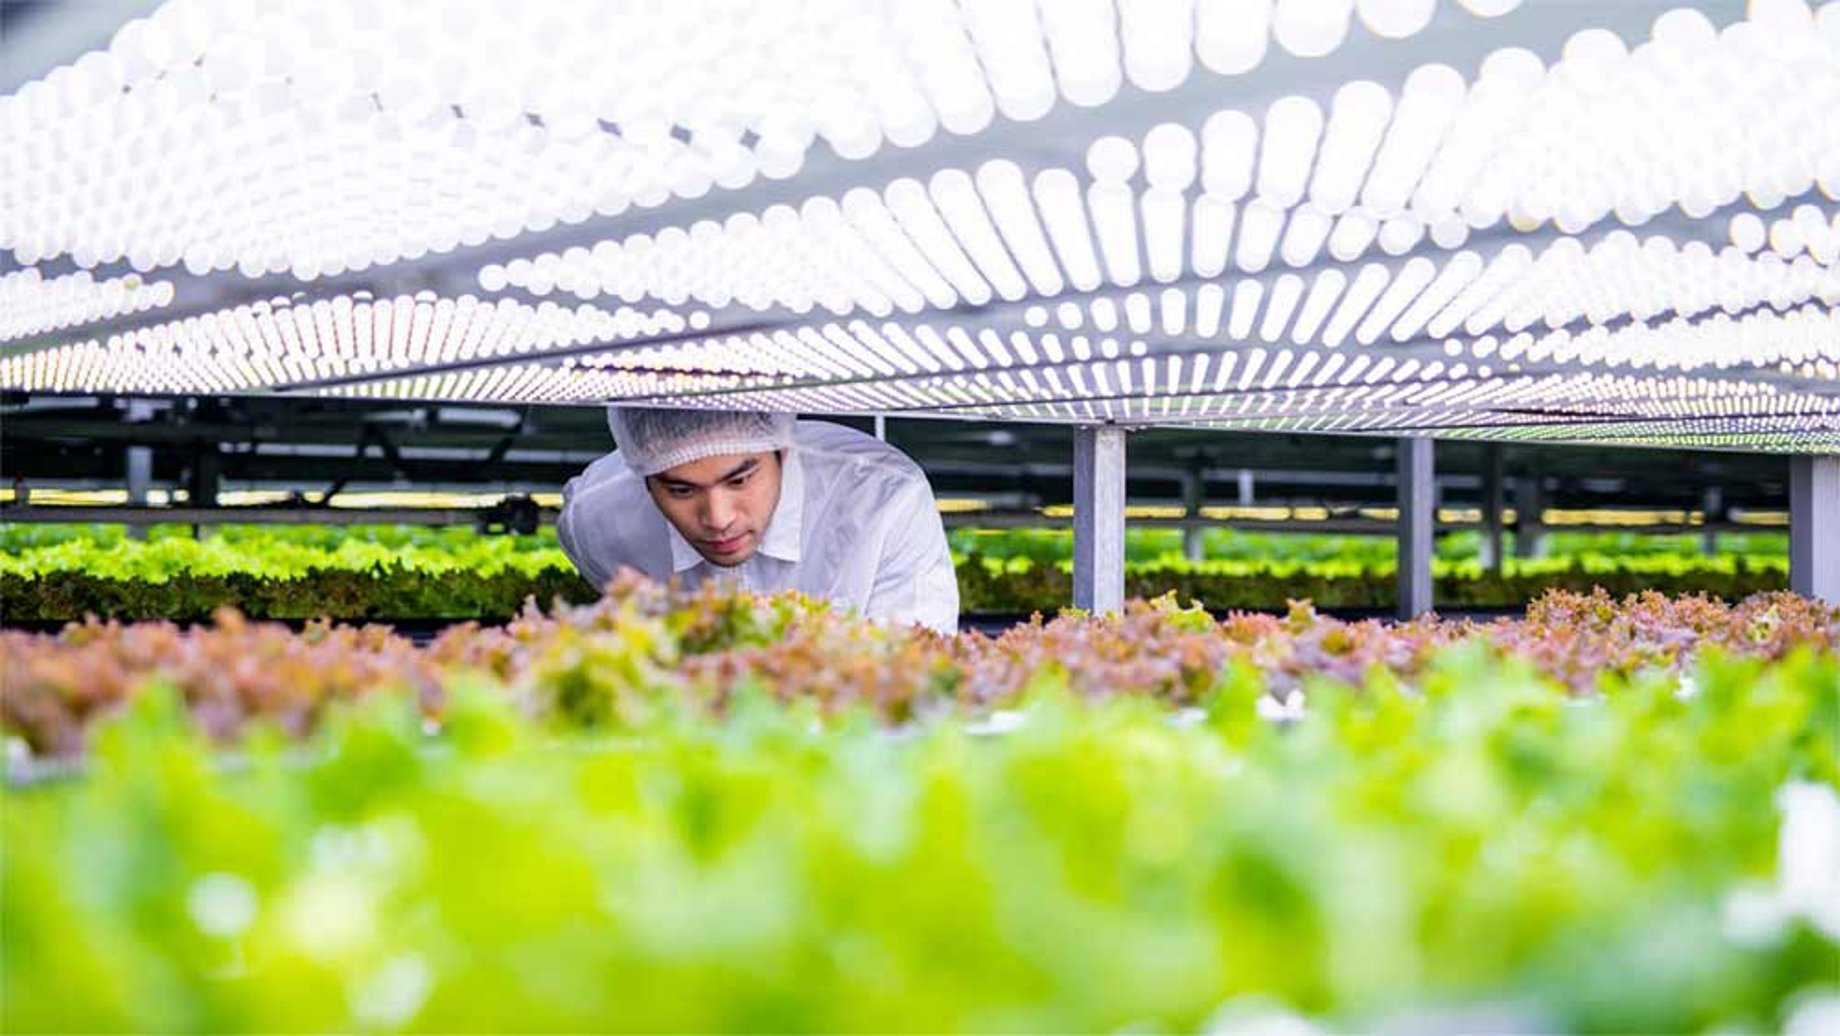 Man tending crops in a greenhouse